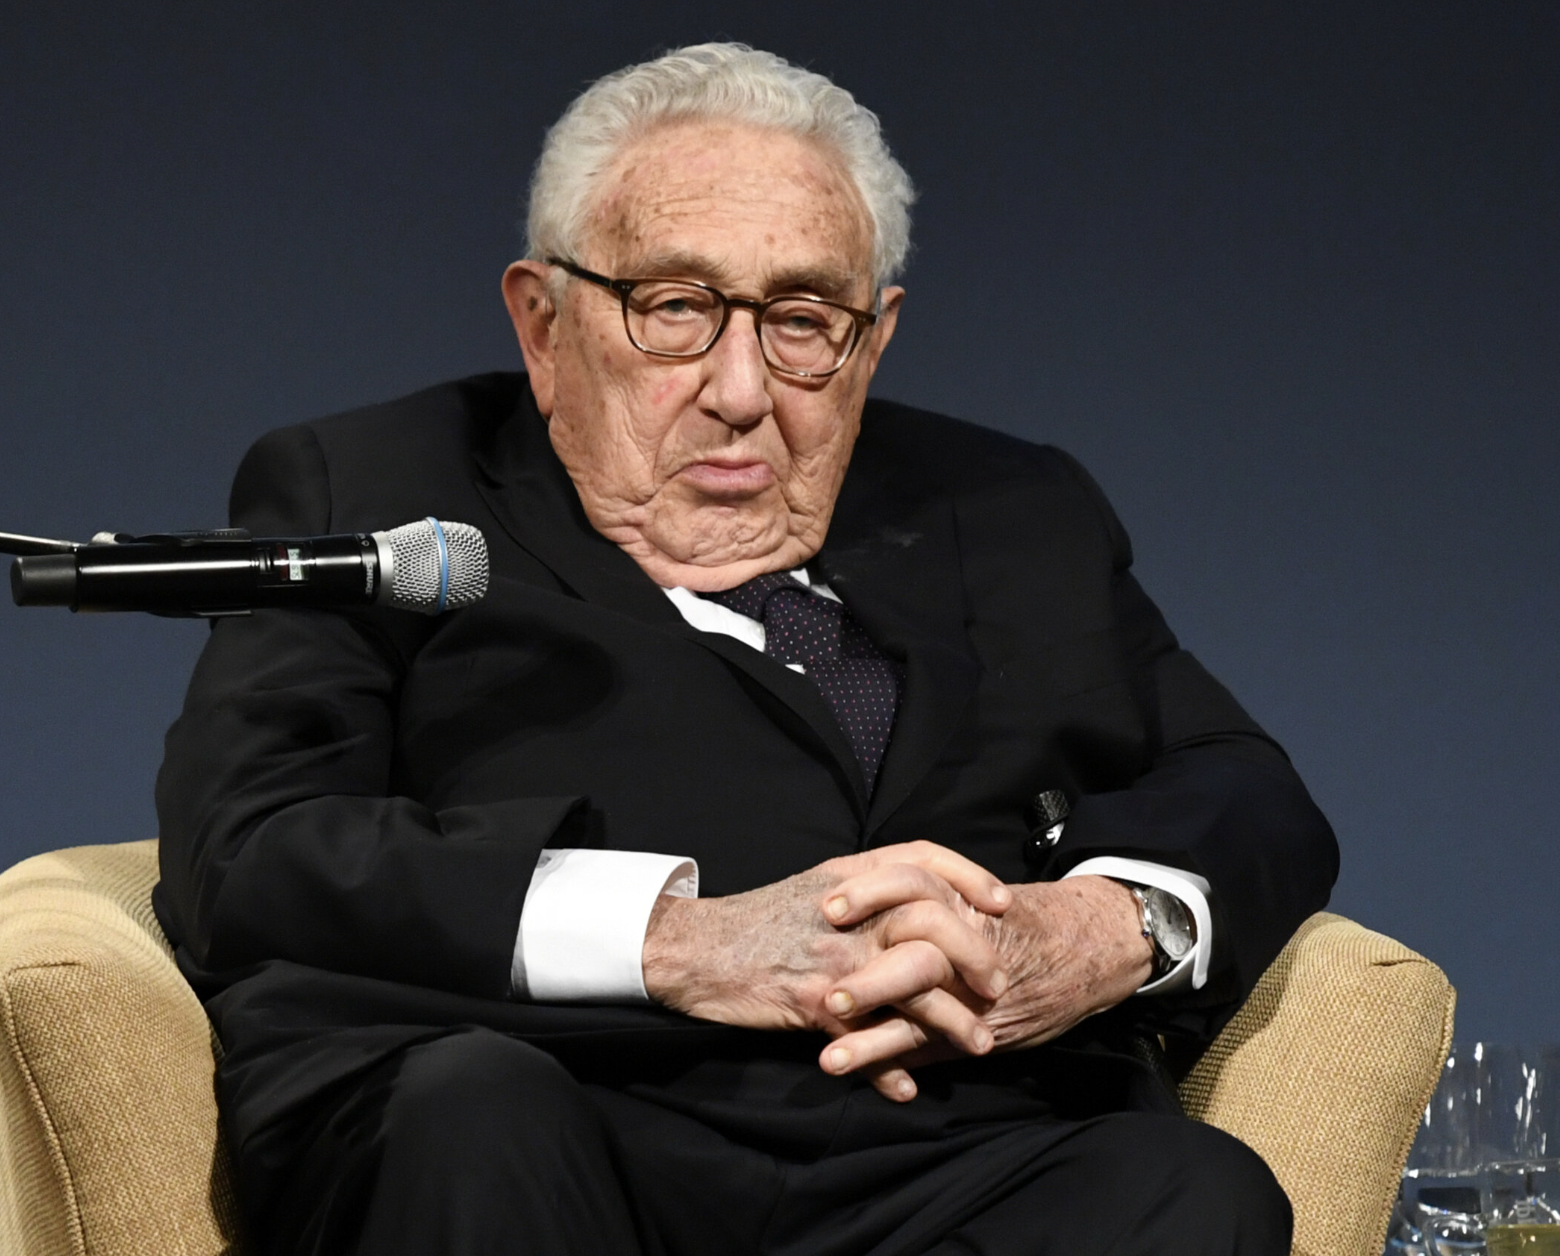 Henry Kissinger.<br><br>During the Vietnam war , he secretly derailed peace talks between the North and South Vietnamese, because he wanted the war to continue and help his career , right through to the next president.<br><br>He also personally planned bombings of targets in Cambodia , who were not even a part of the war. He had no military training or knowledge , he chose random targets he thought would stop supply lines to Vietnam. These were planned in secret , without congress knowing. - u/Fluffy_Morning_1569